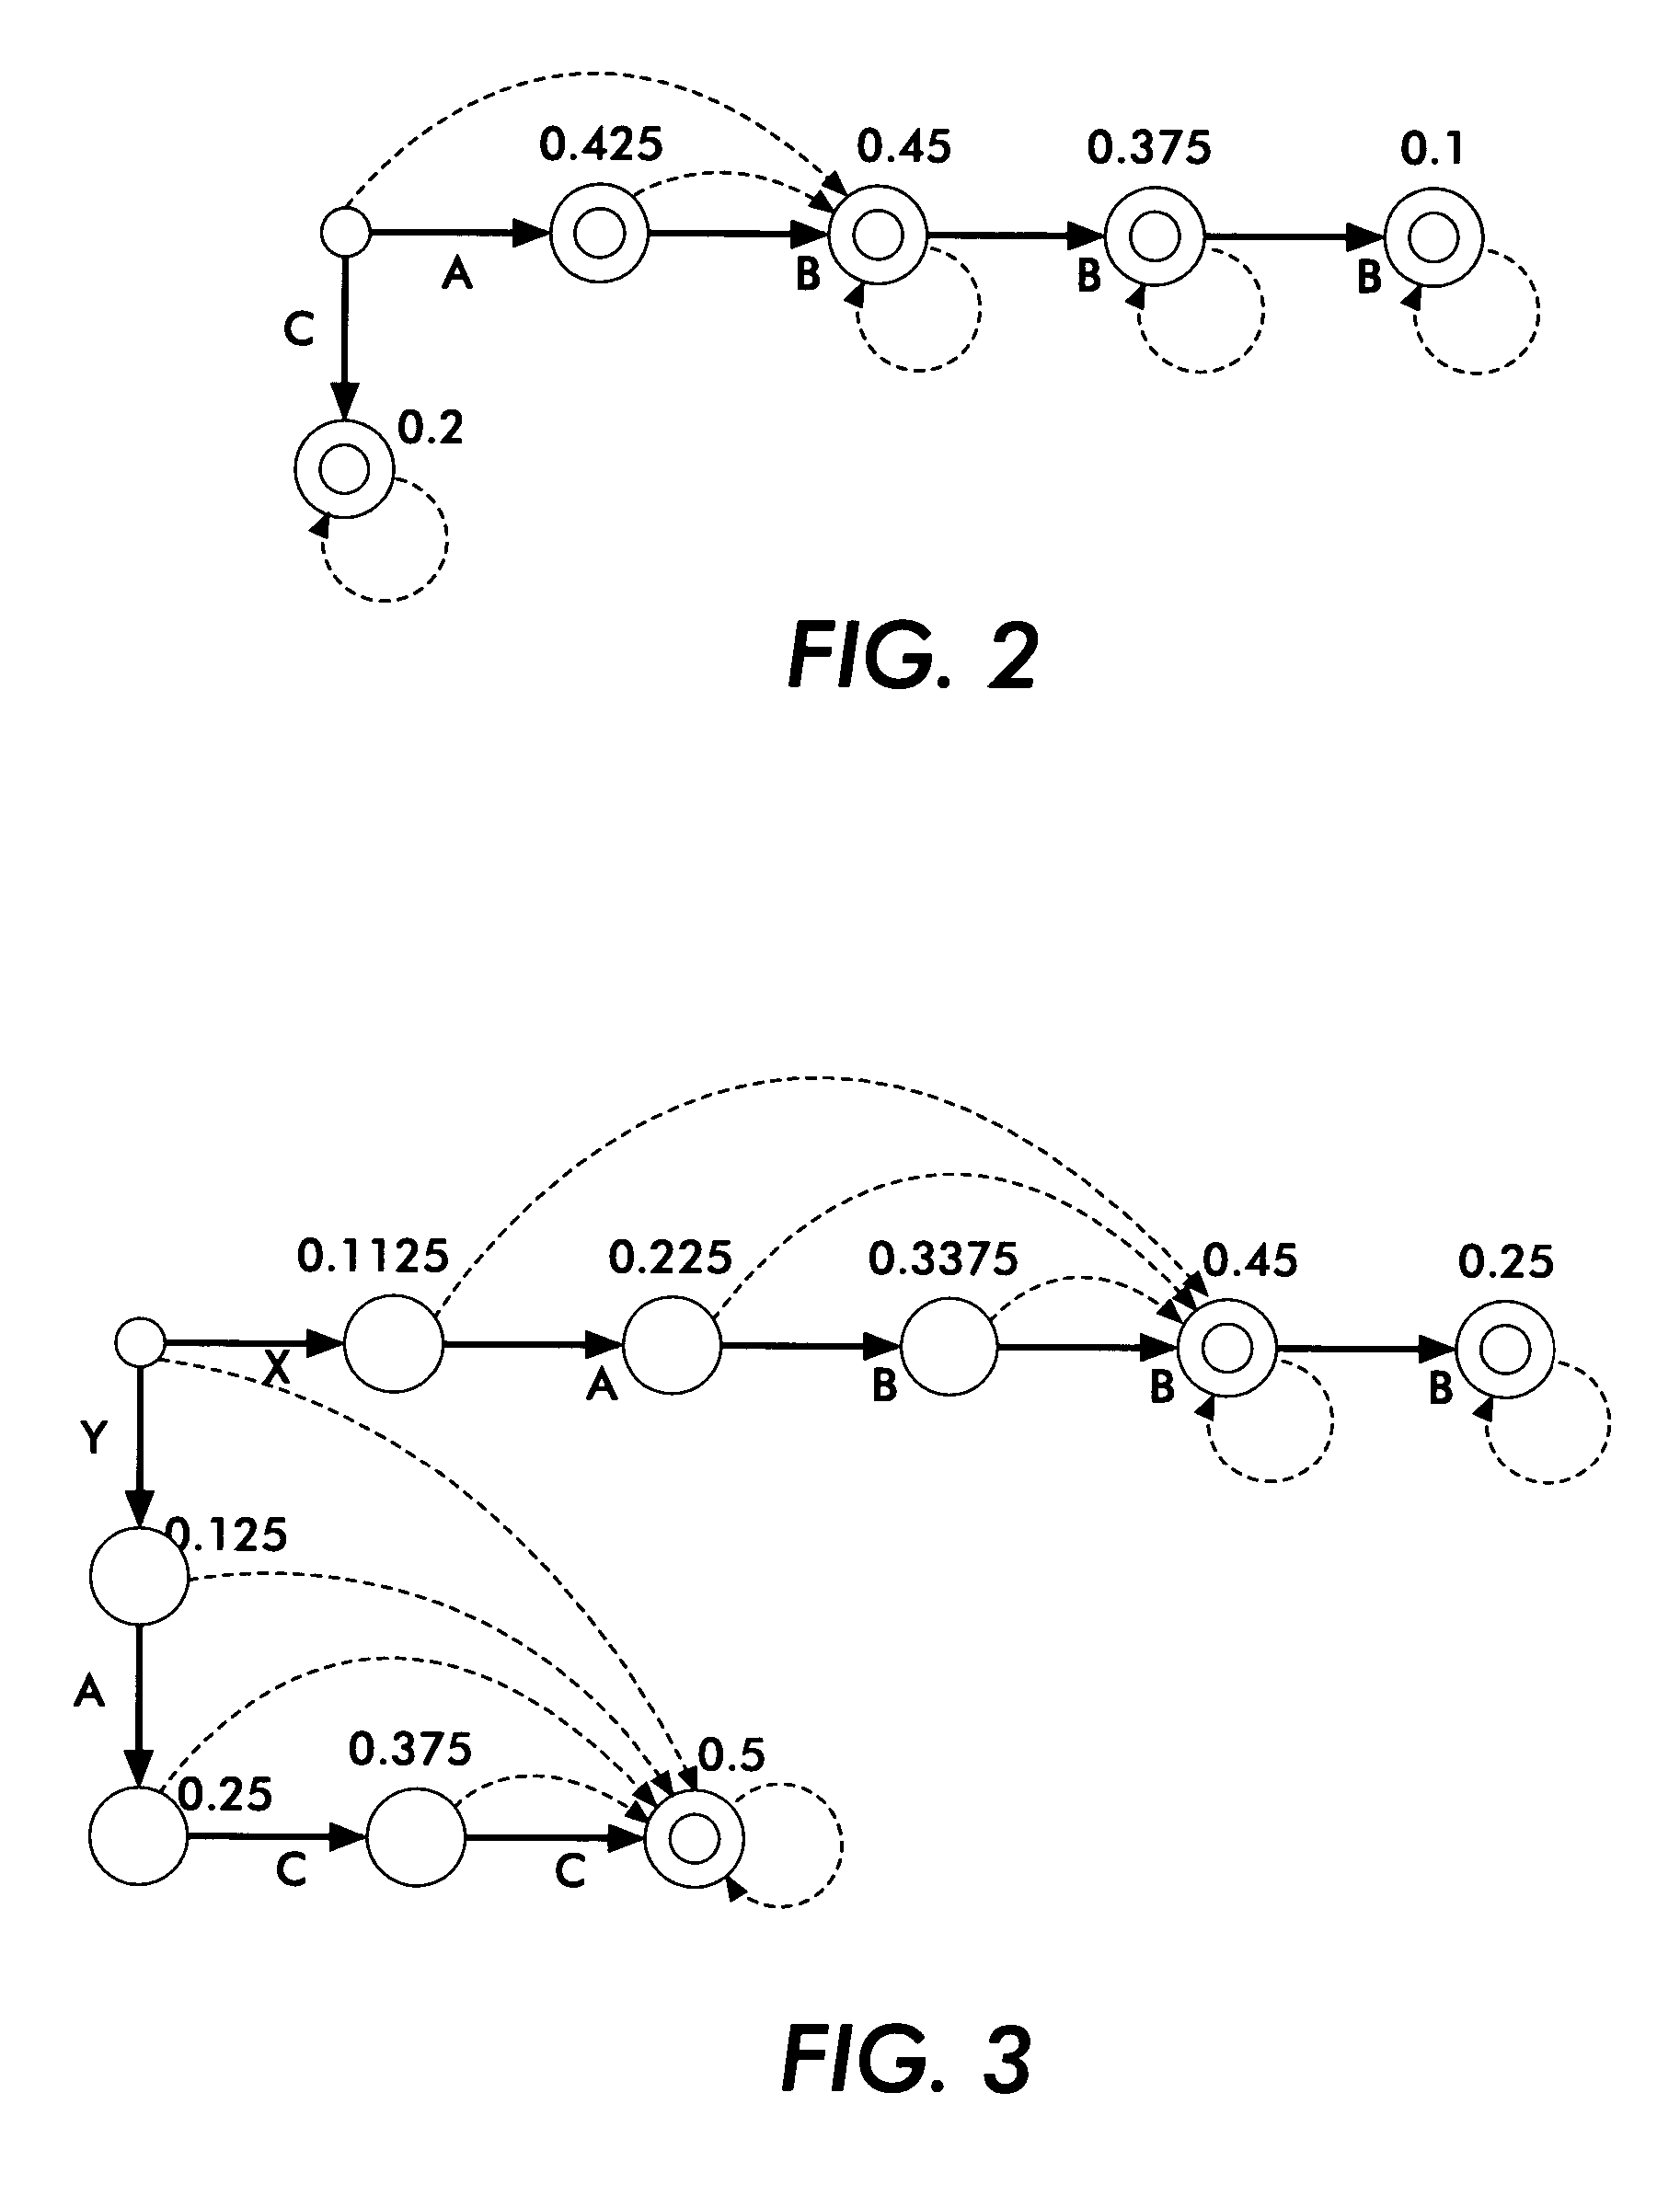 System and method for structured document authoring